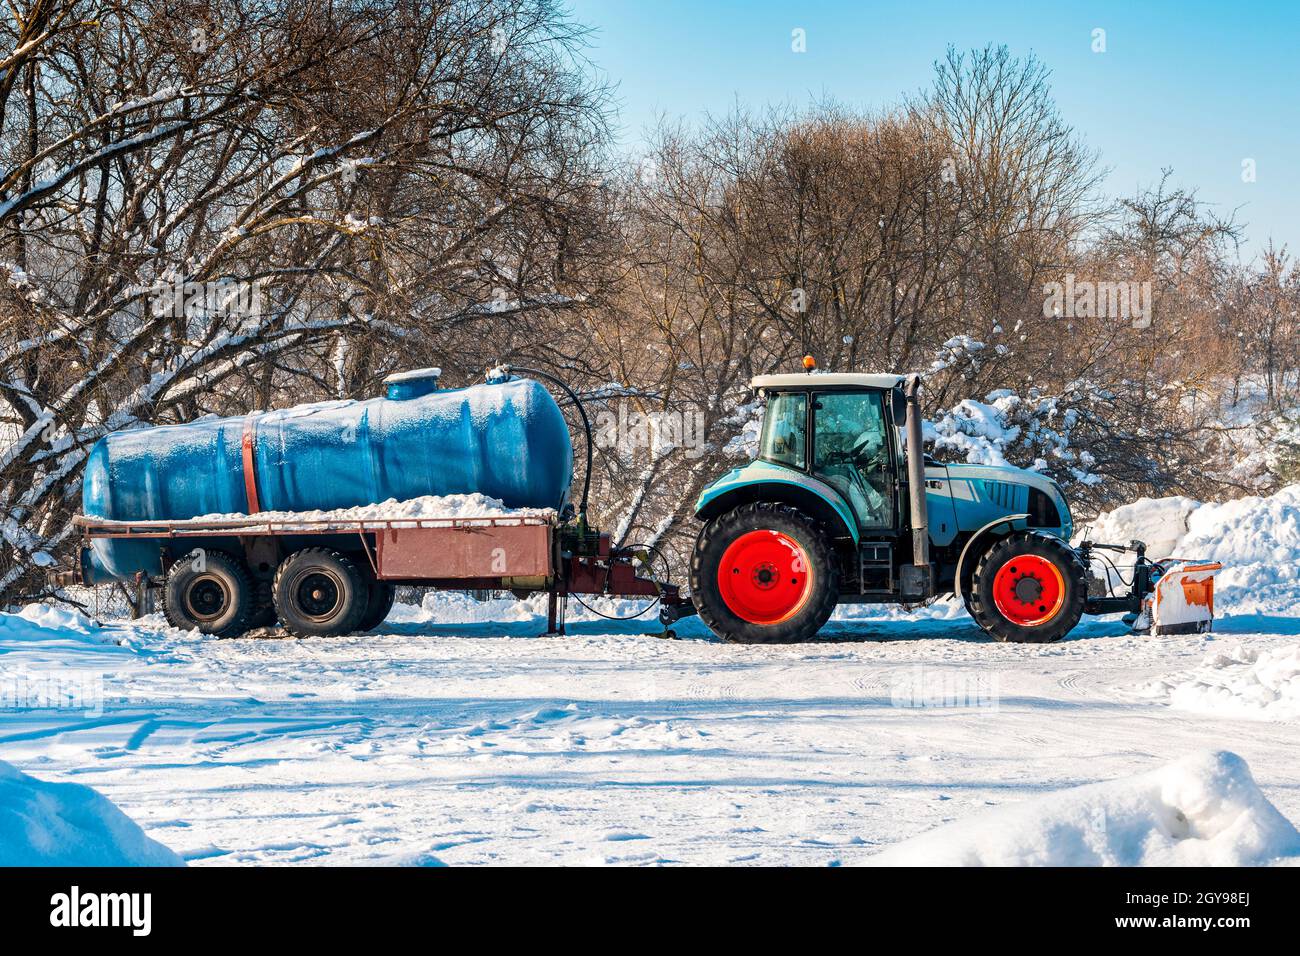 Tractor with tanker for cleaning the sewer system. Winter season. Stock Photo